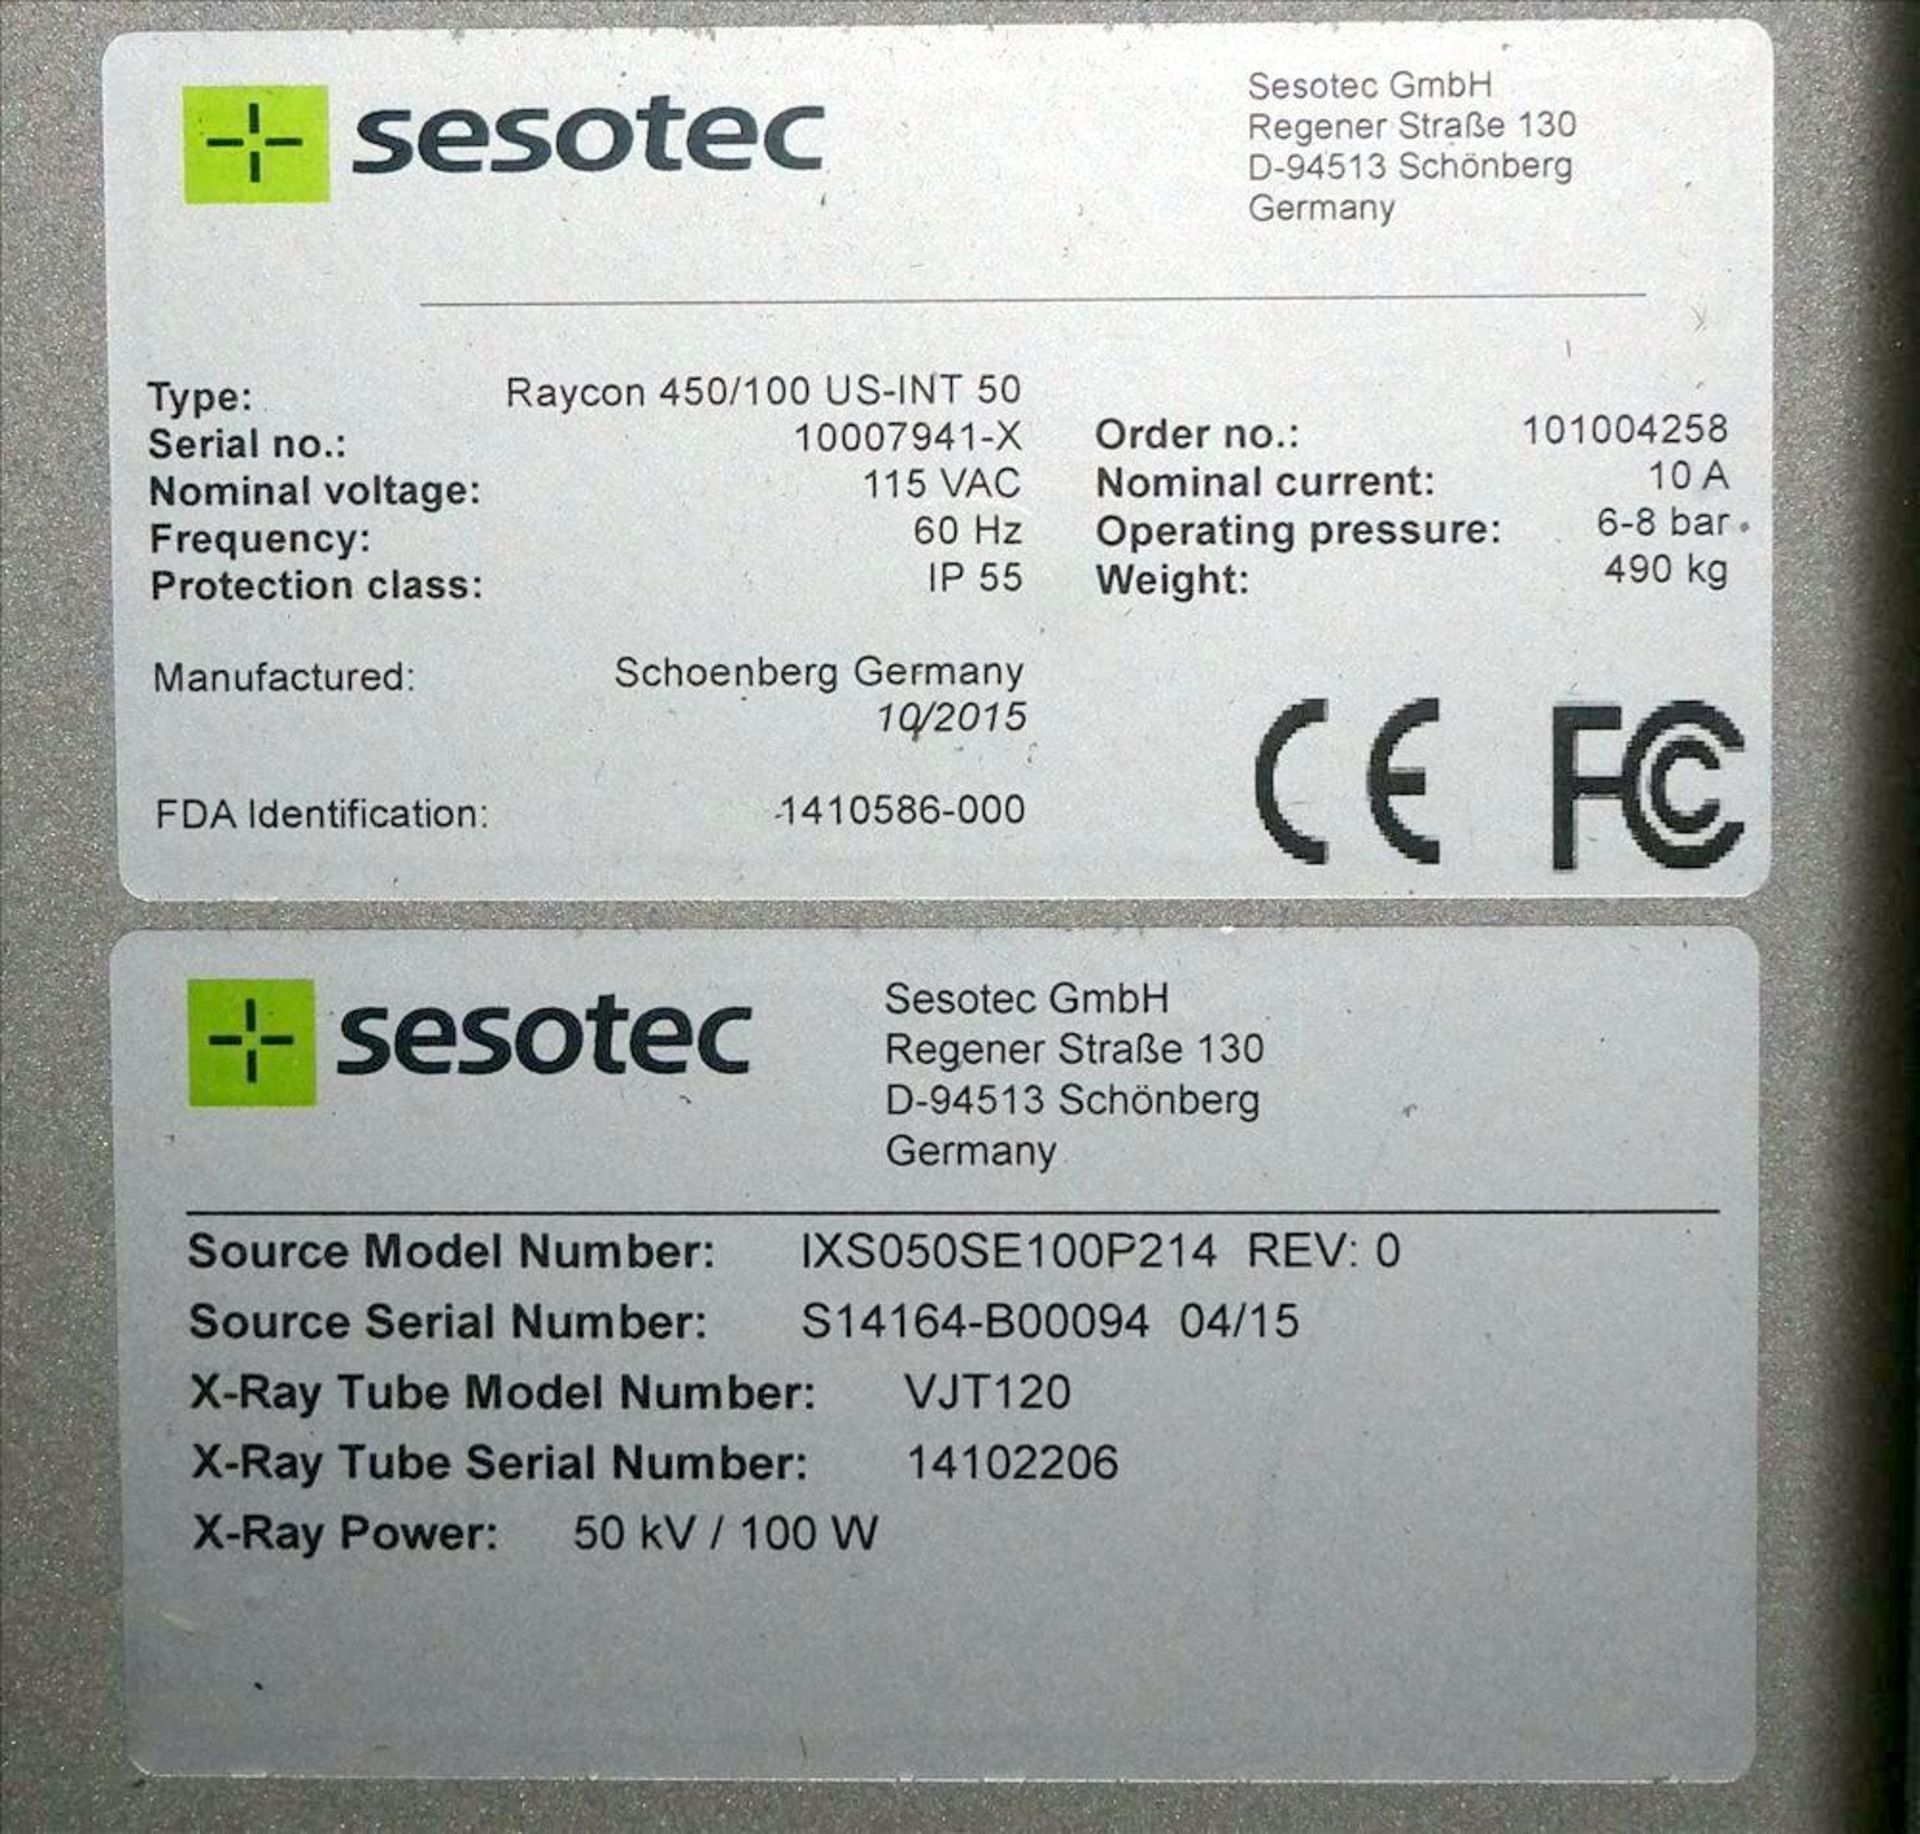 NEW, NEVER INSTALLED Sesotec Raycon X-Ray Food Inspection System, Type 450/100 US-INT 50. - Image 10 of 13